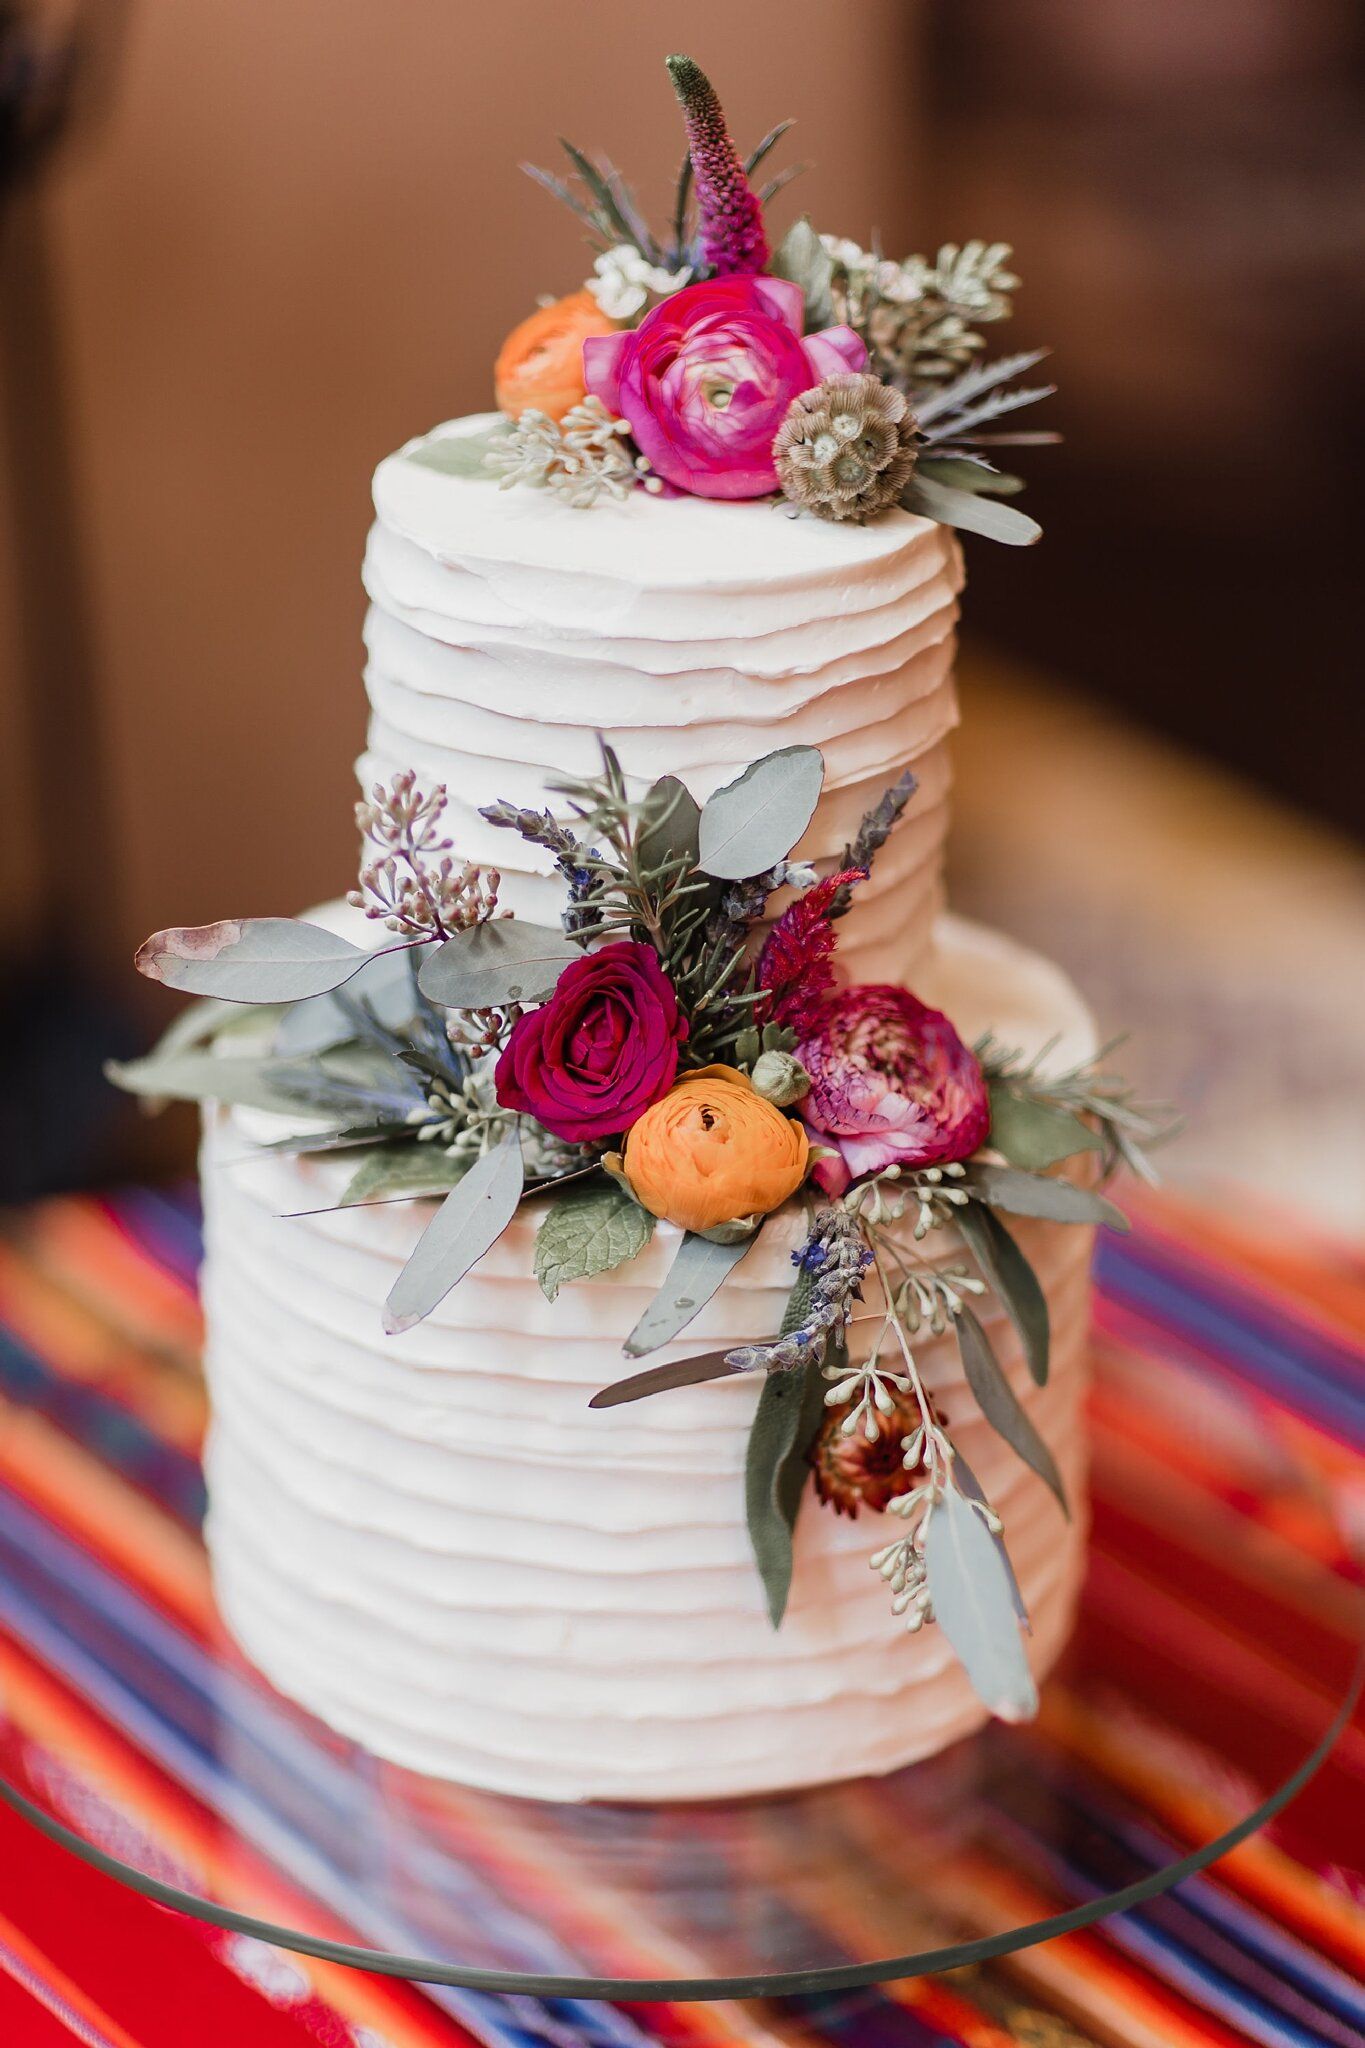 buttercream wedding cake with mecian style color flowers